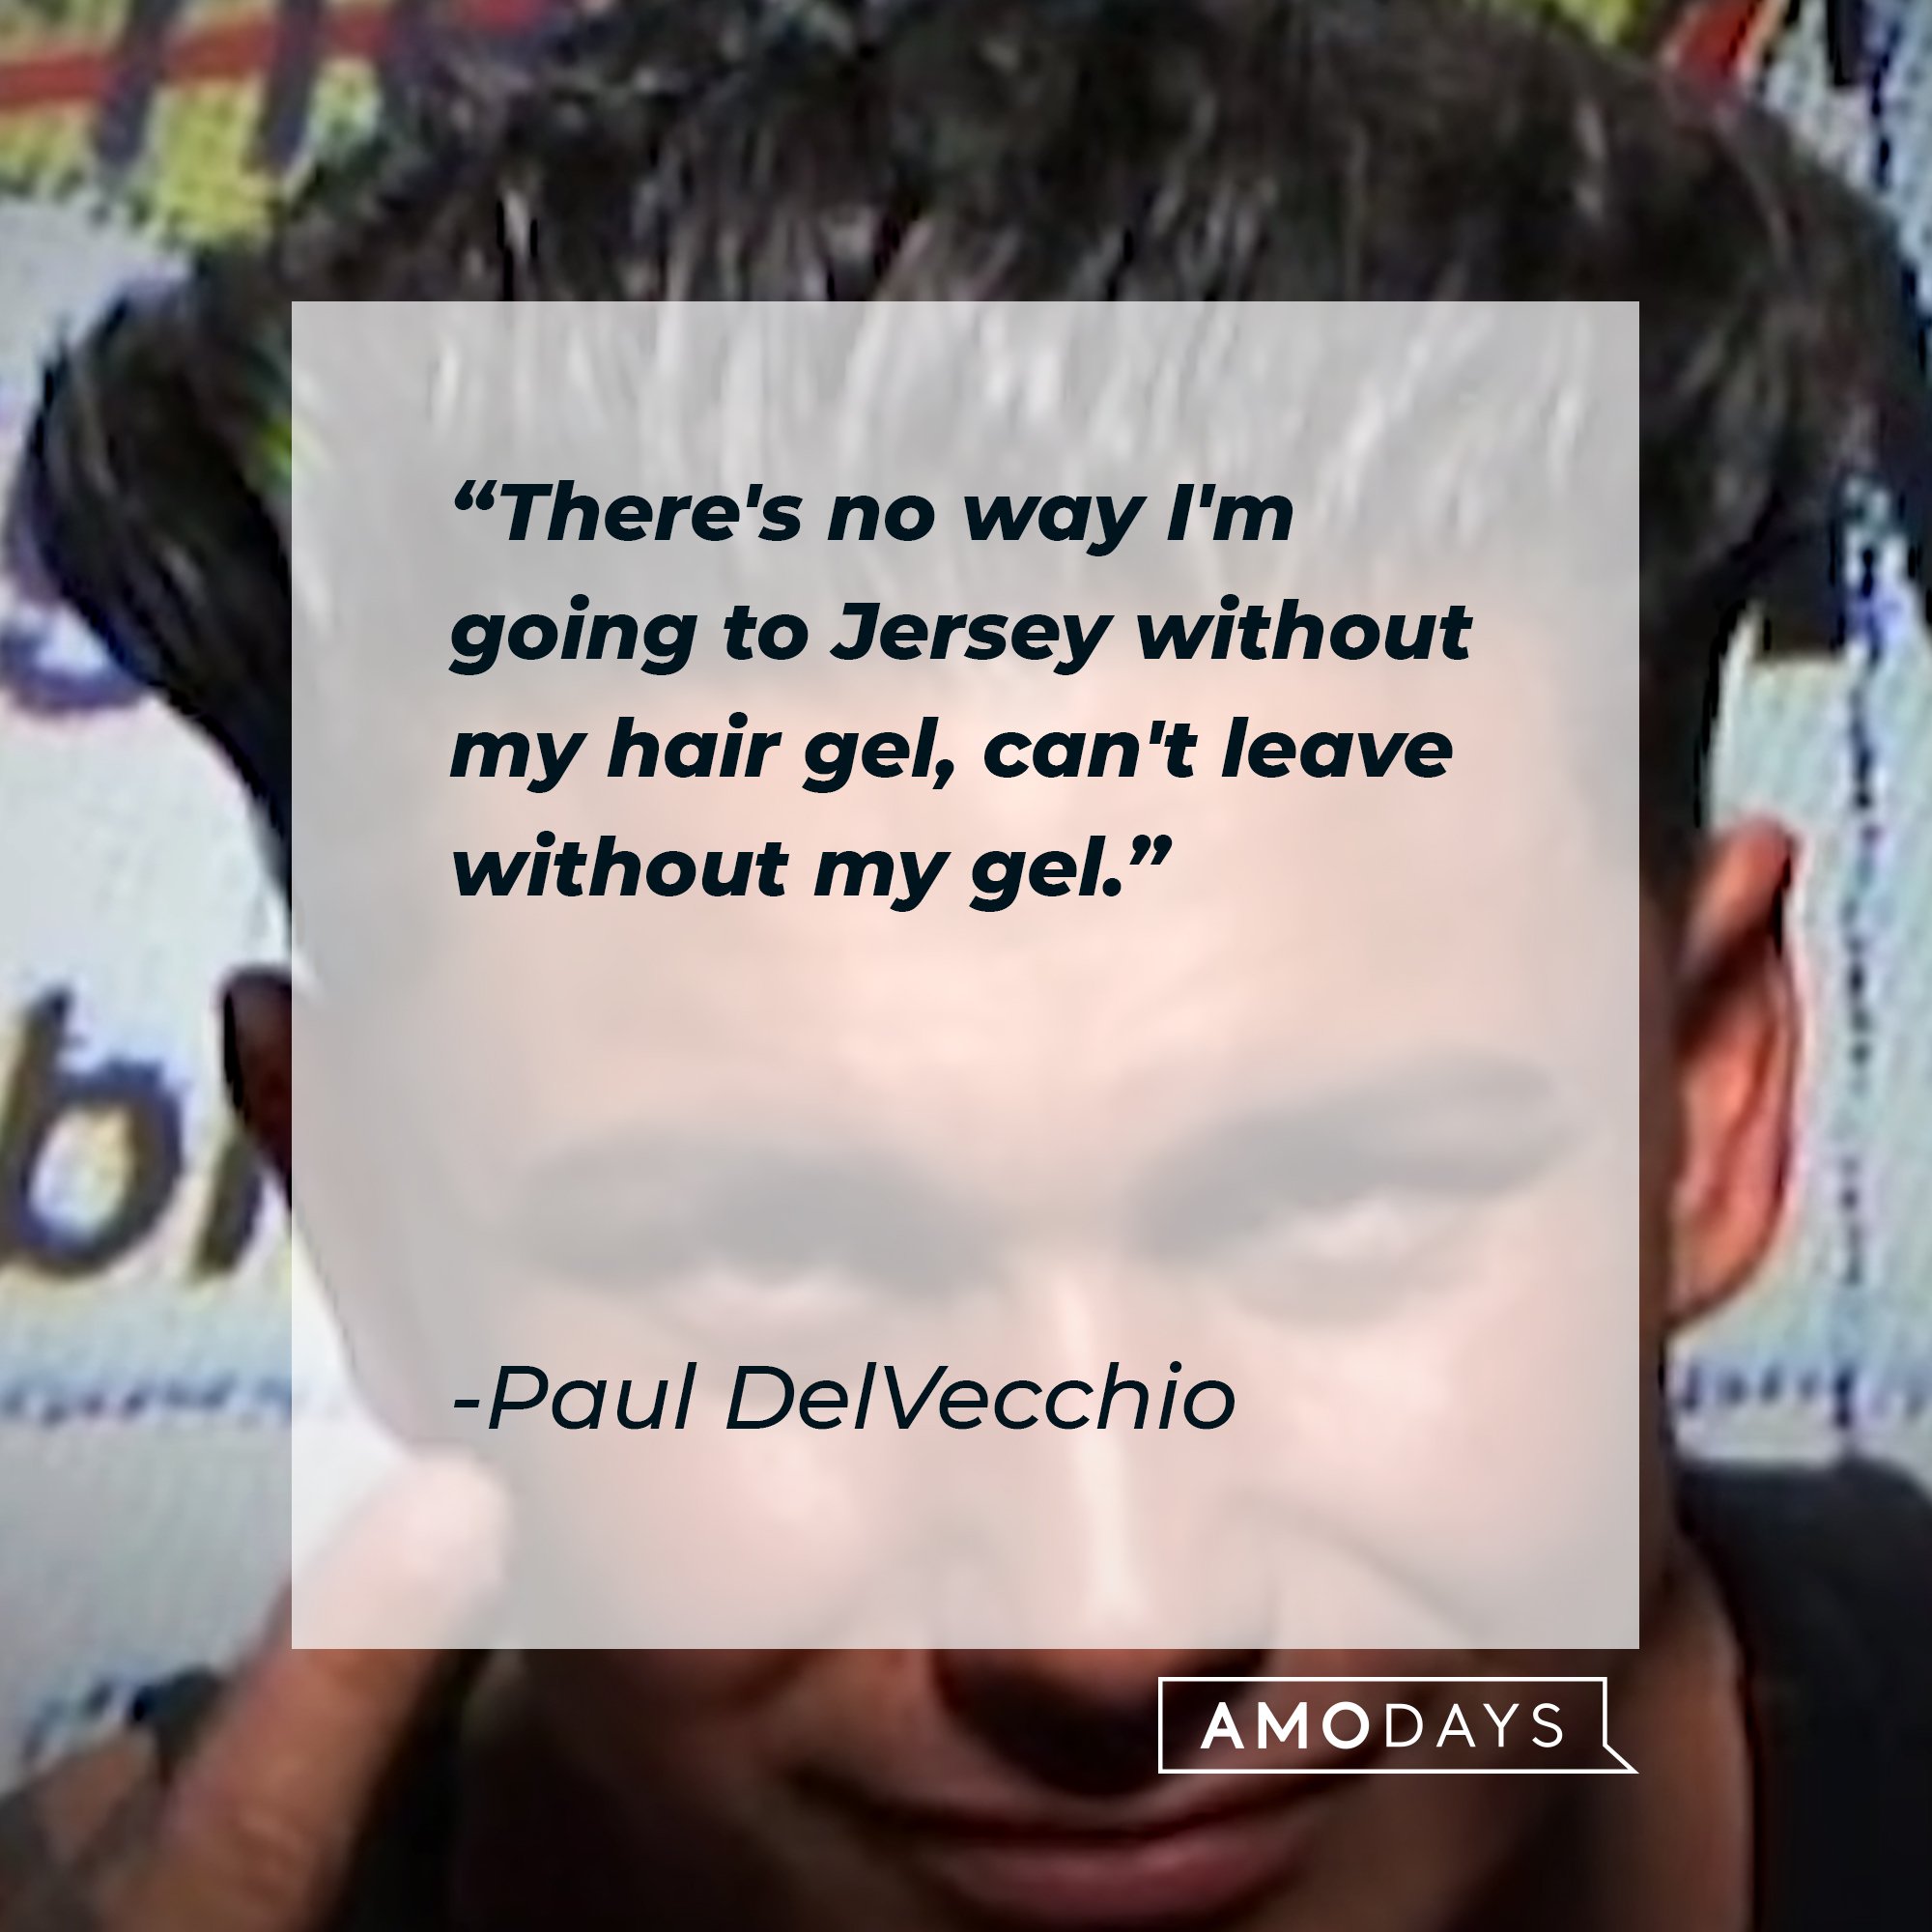 Paul DelVecchio ‘s quote: "There's no way I'm going to Jersey without my hair gel, can't leave without my gel." | Image: AmoDays